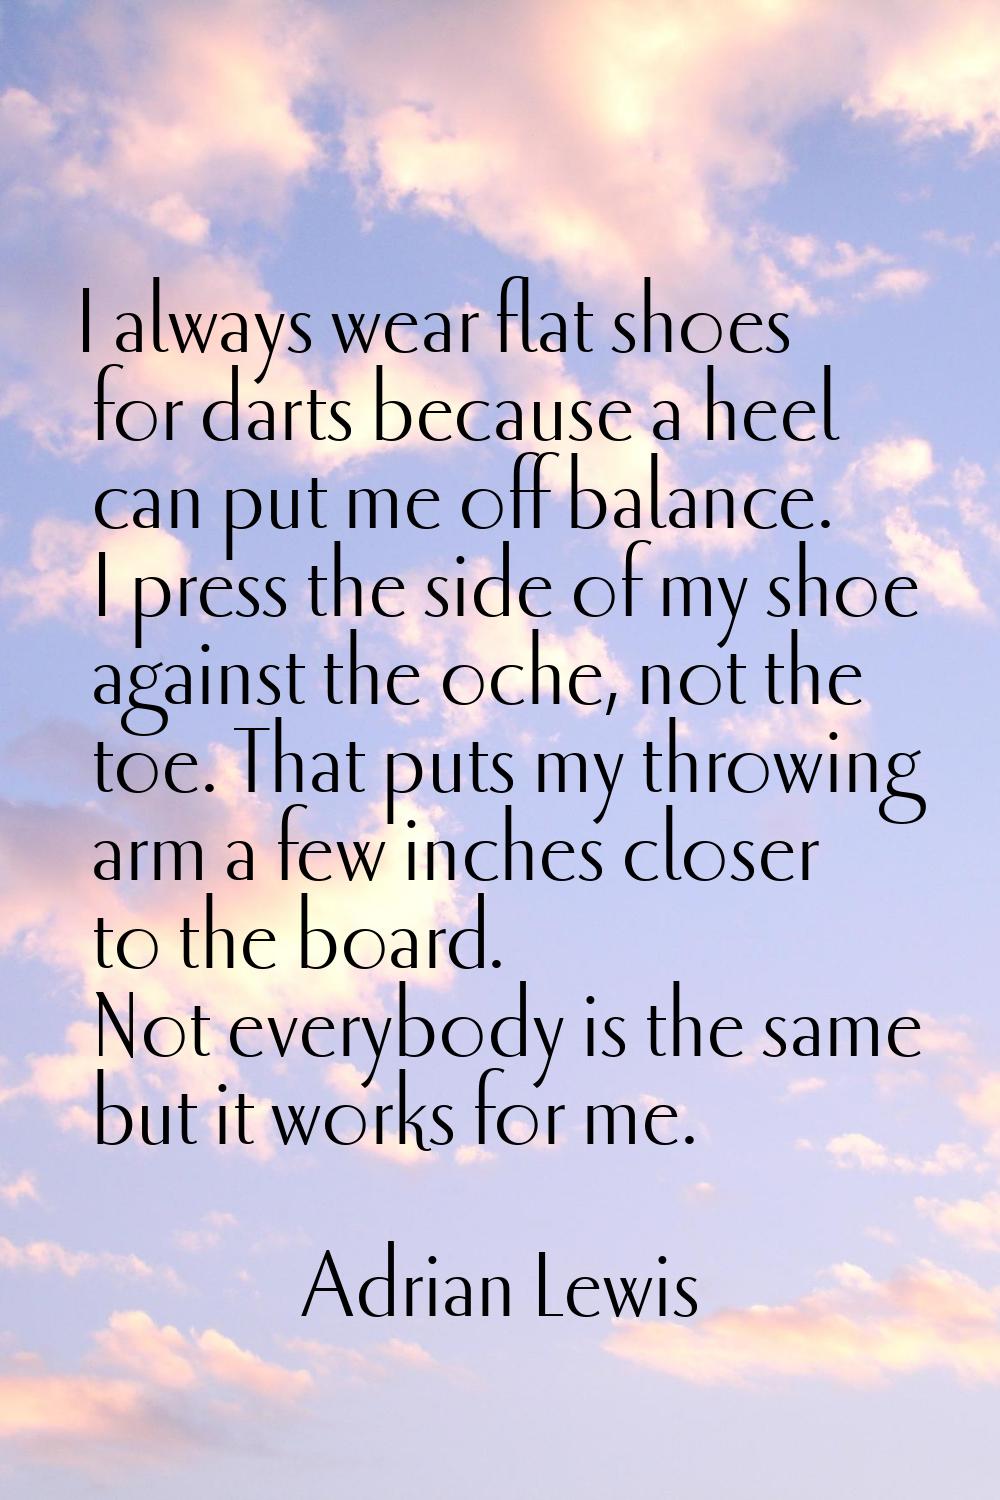 I always wear flat shoes for darts because a heel can put me off balance. I press the side of my sh